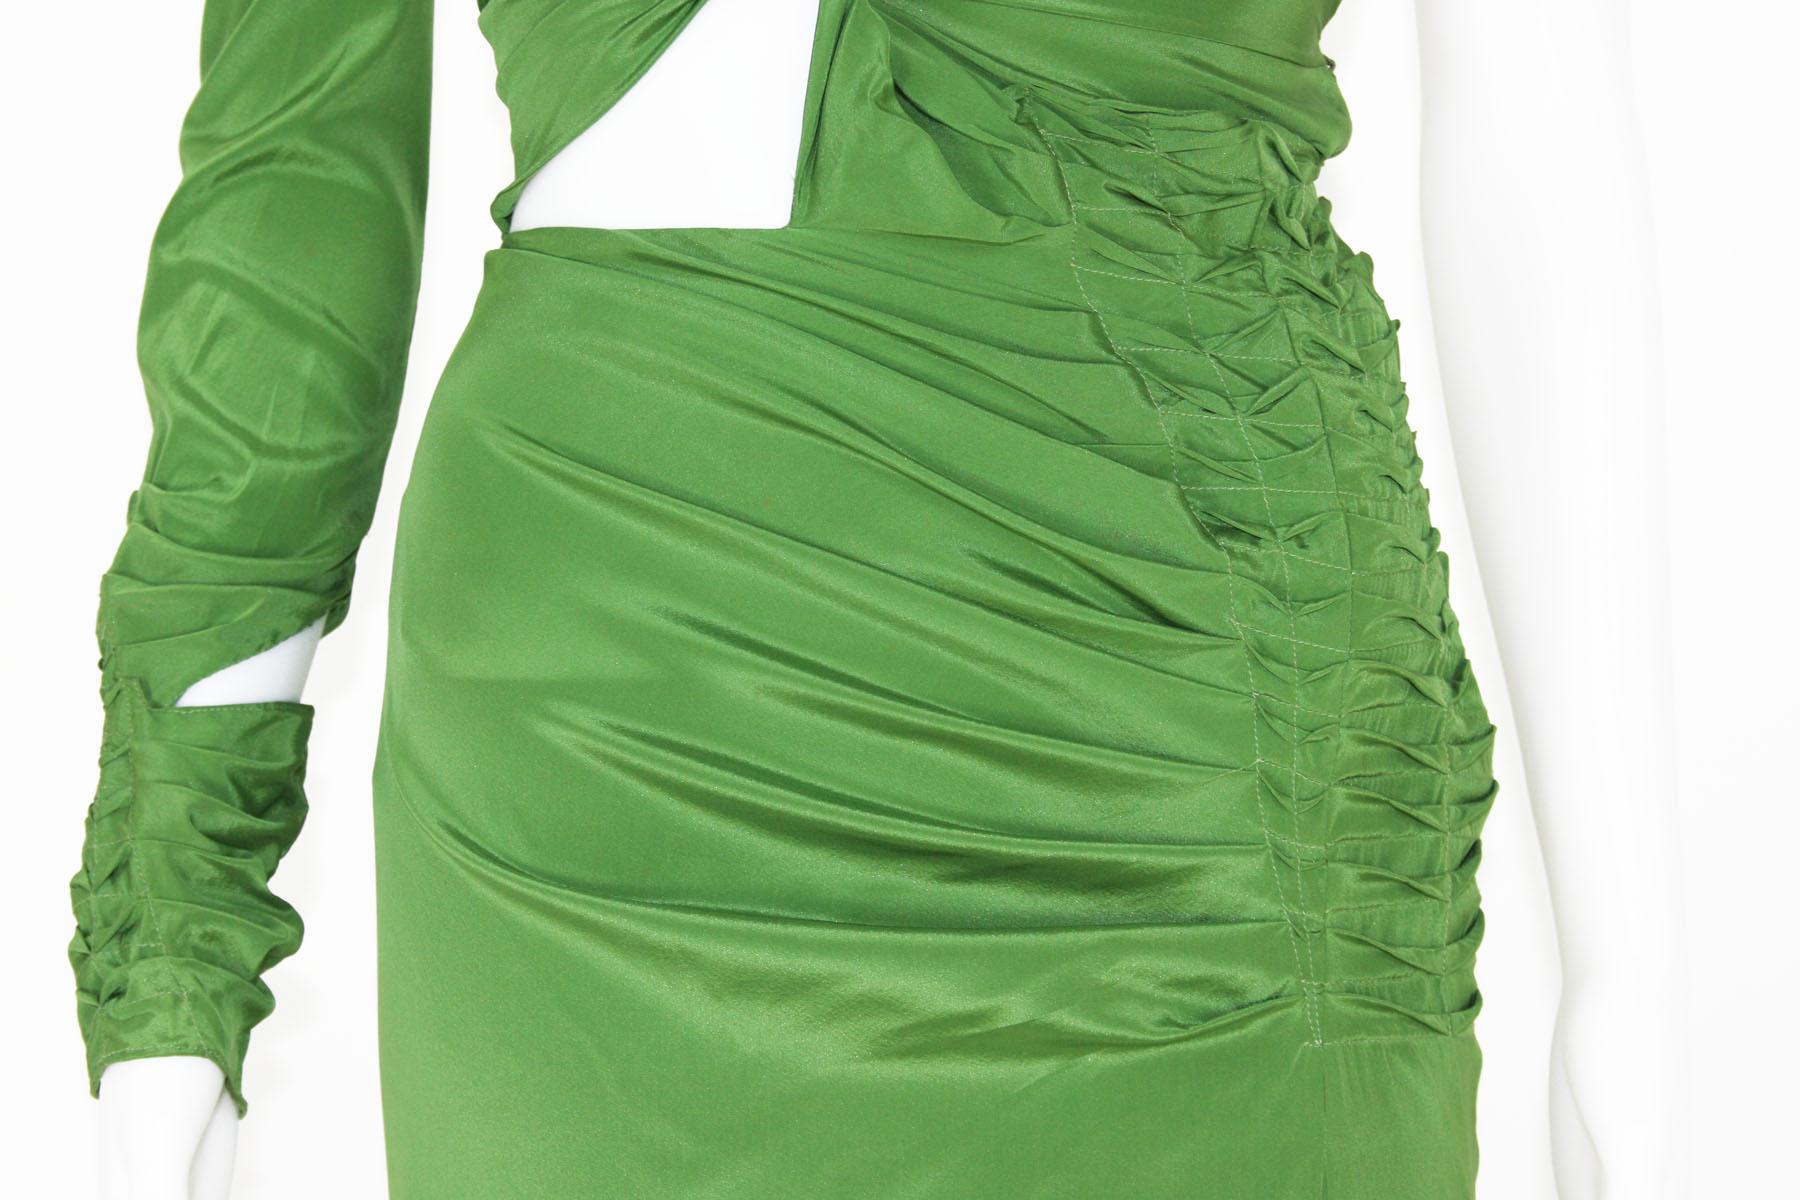 Women's Tom Ford for Gucci 2003 Collection Silk Green Bondage Cut-Out Dress Gown  For Sale